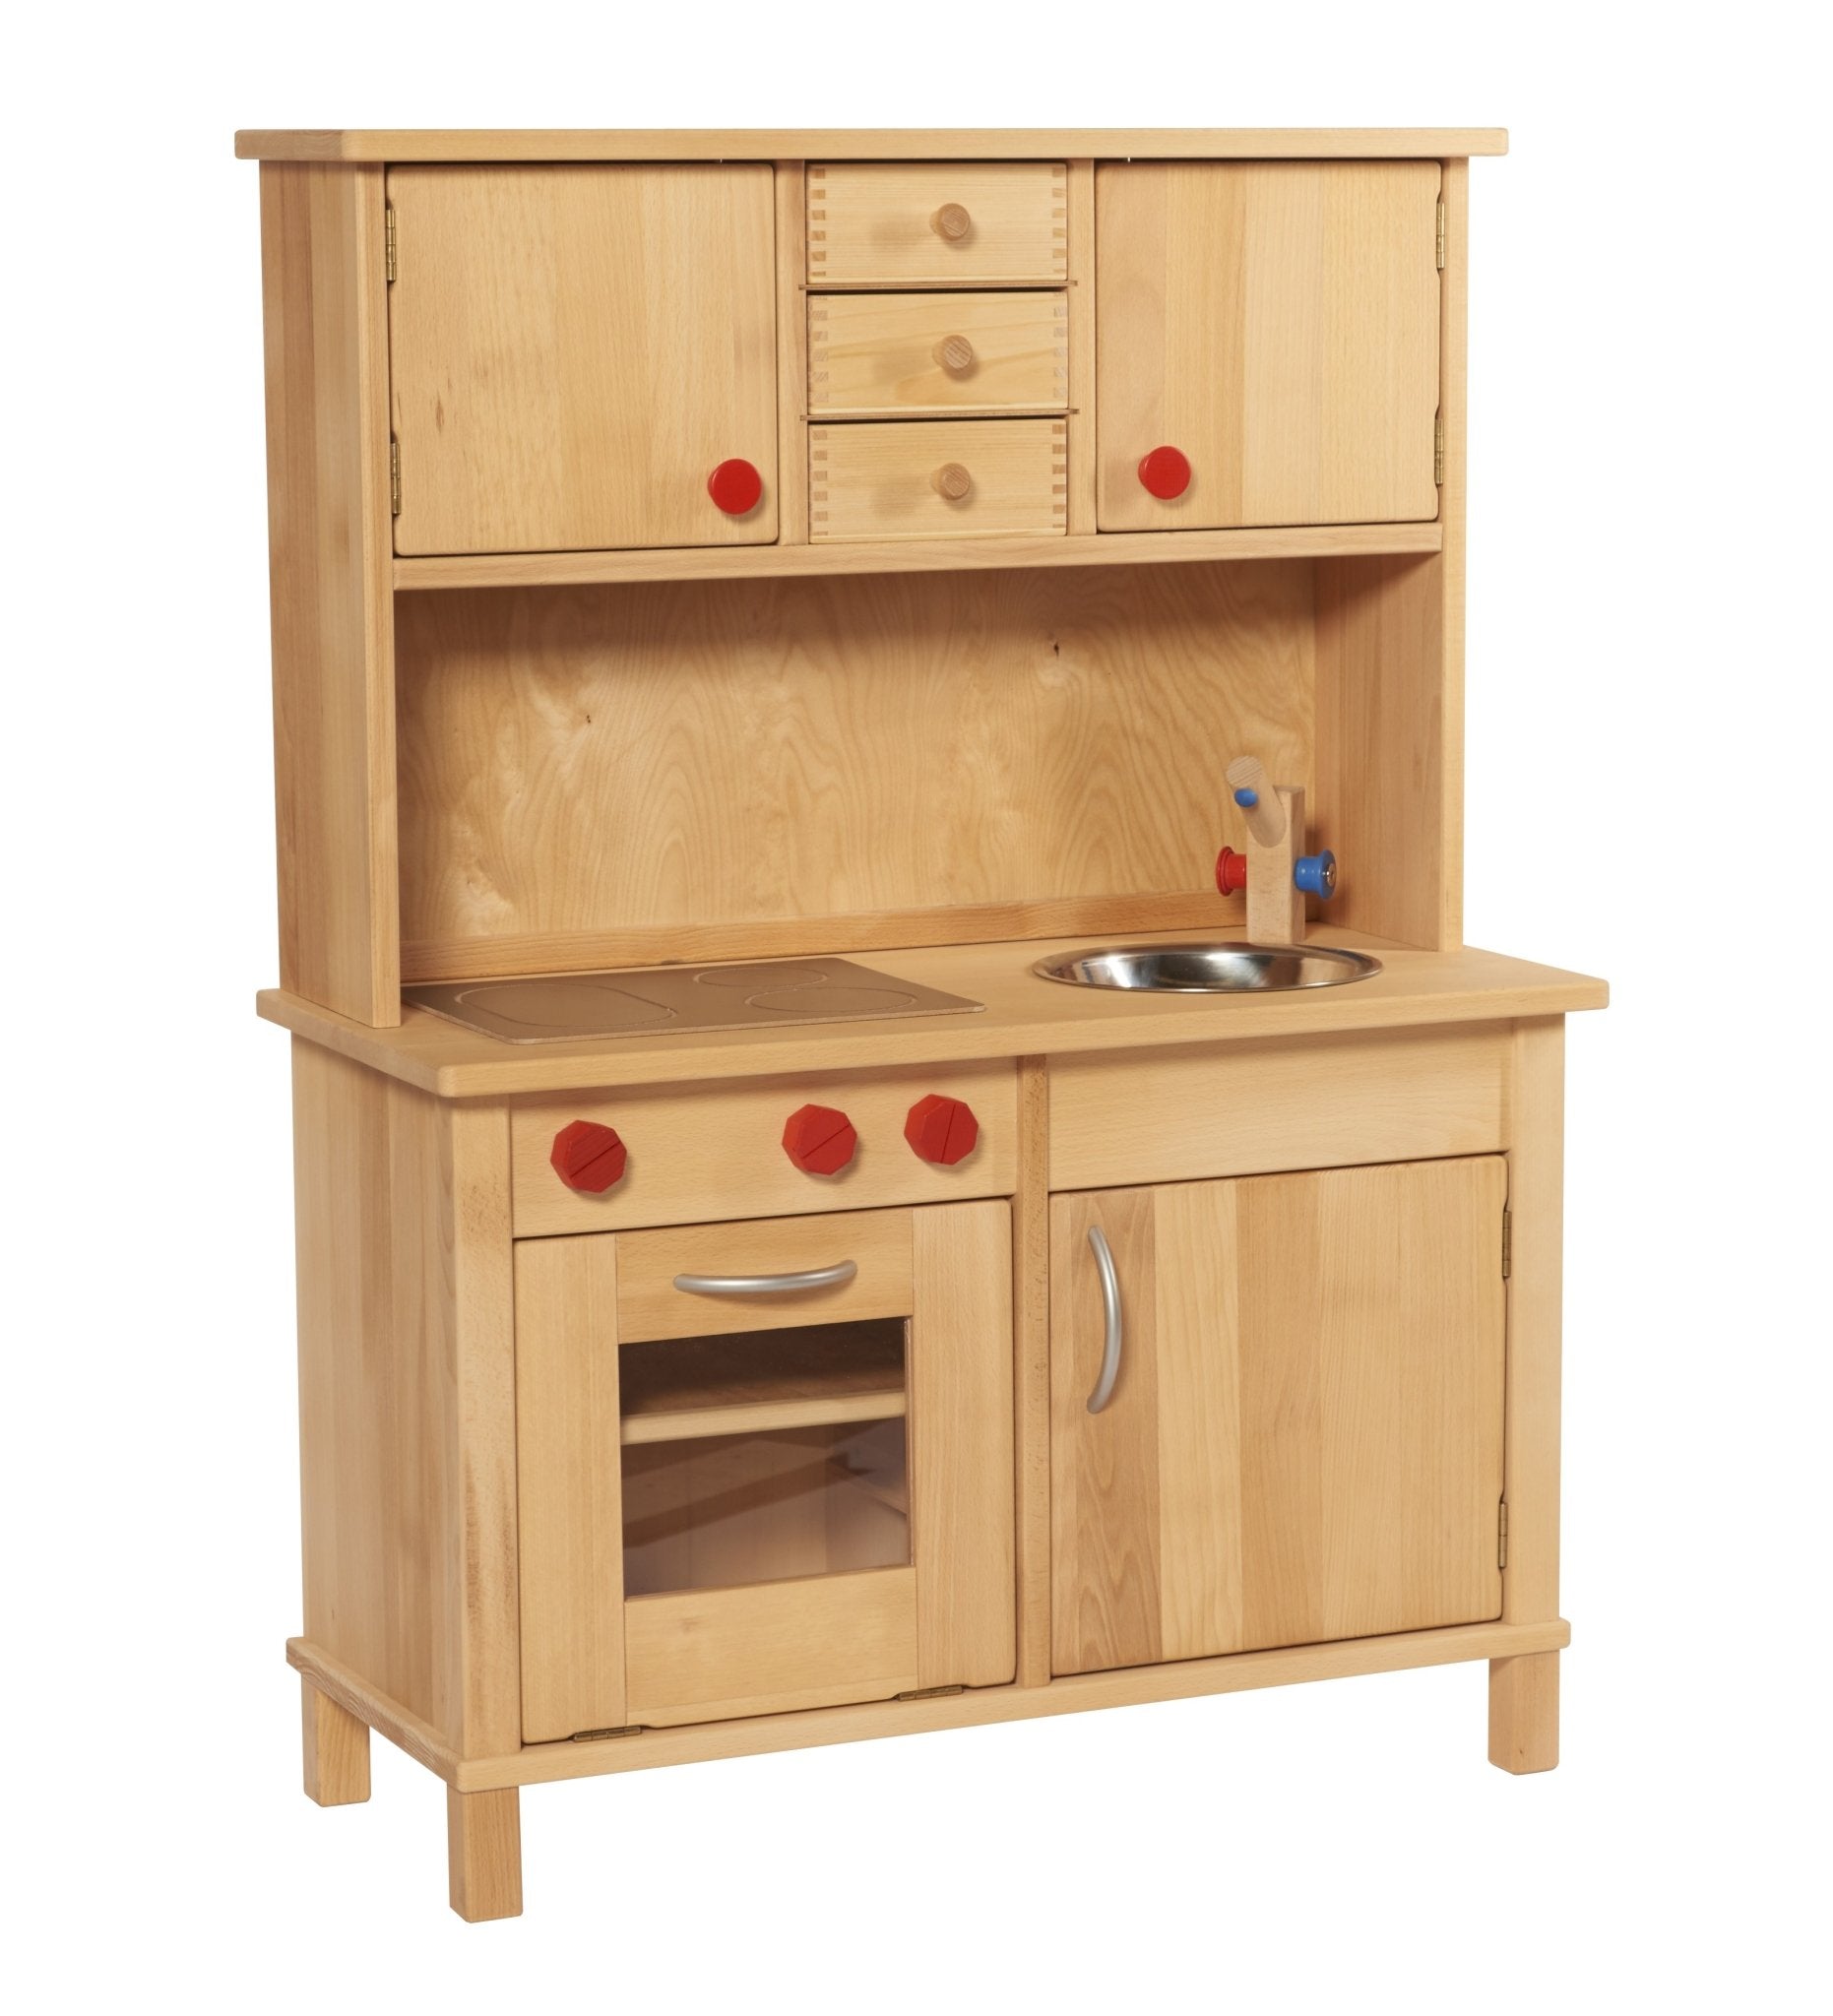 Gluckskafer Play Kitchen with Cuppboard - Wood Wood Toys Canada's Favourite Montessori Toy Store